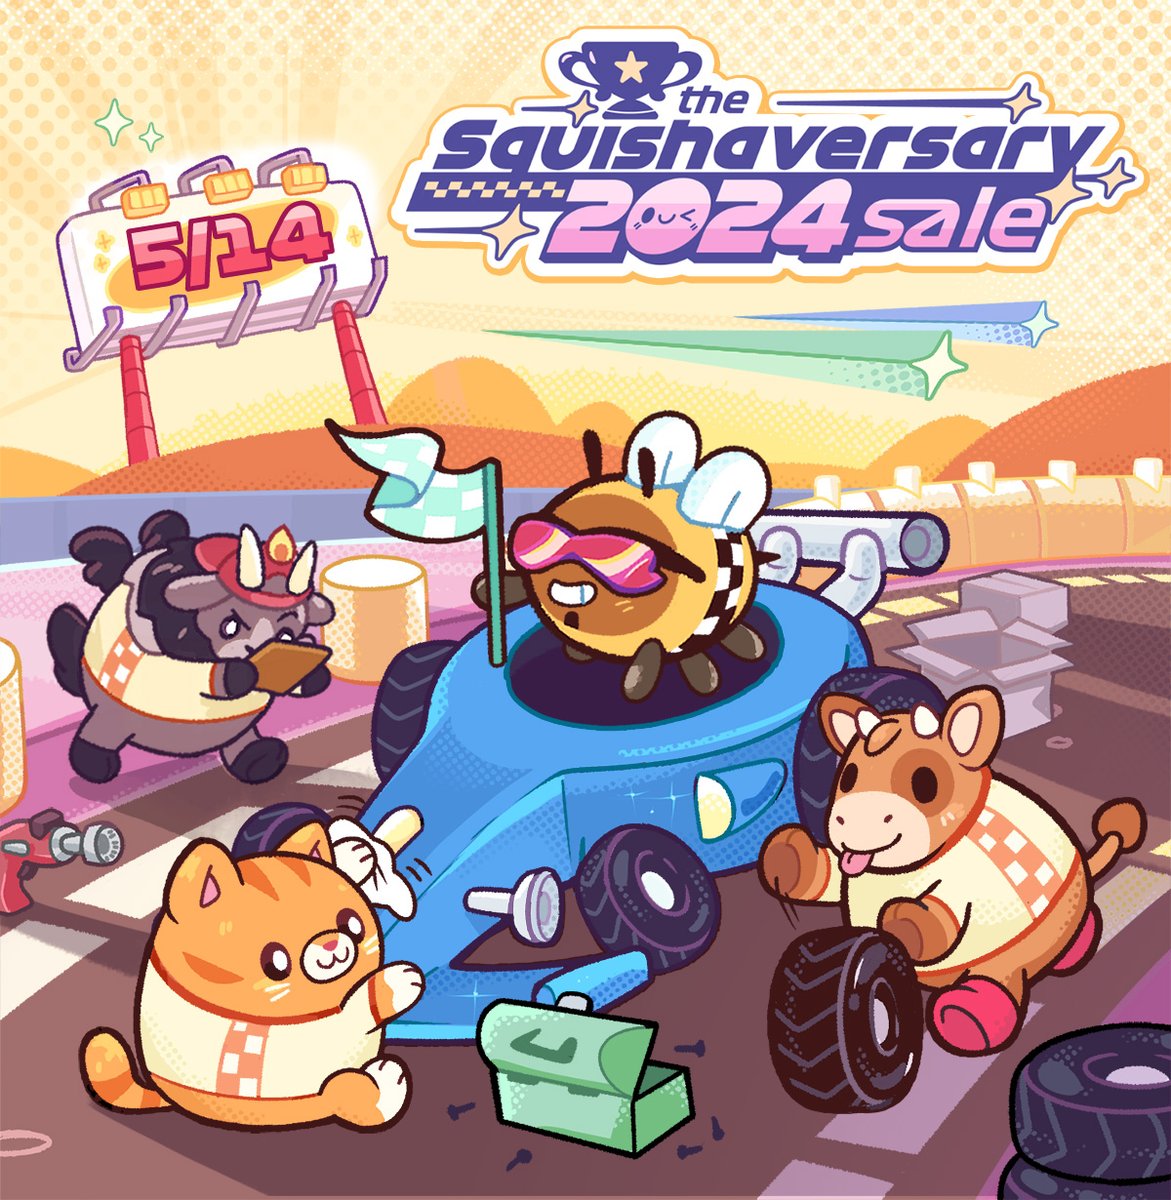 Start your engines!! Our annual Squishaversary Sale is right around the corner! Next Tuesday May 14th is our BIGGEST and SQUISHIEST sale of the year, you don't wanna miss this one, folks! 🏁🏁🏁 🎉 squishable.com 🎉